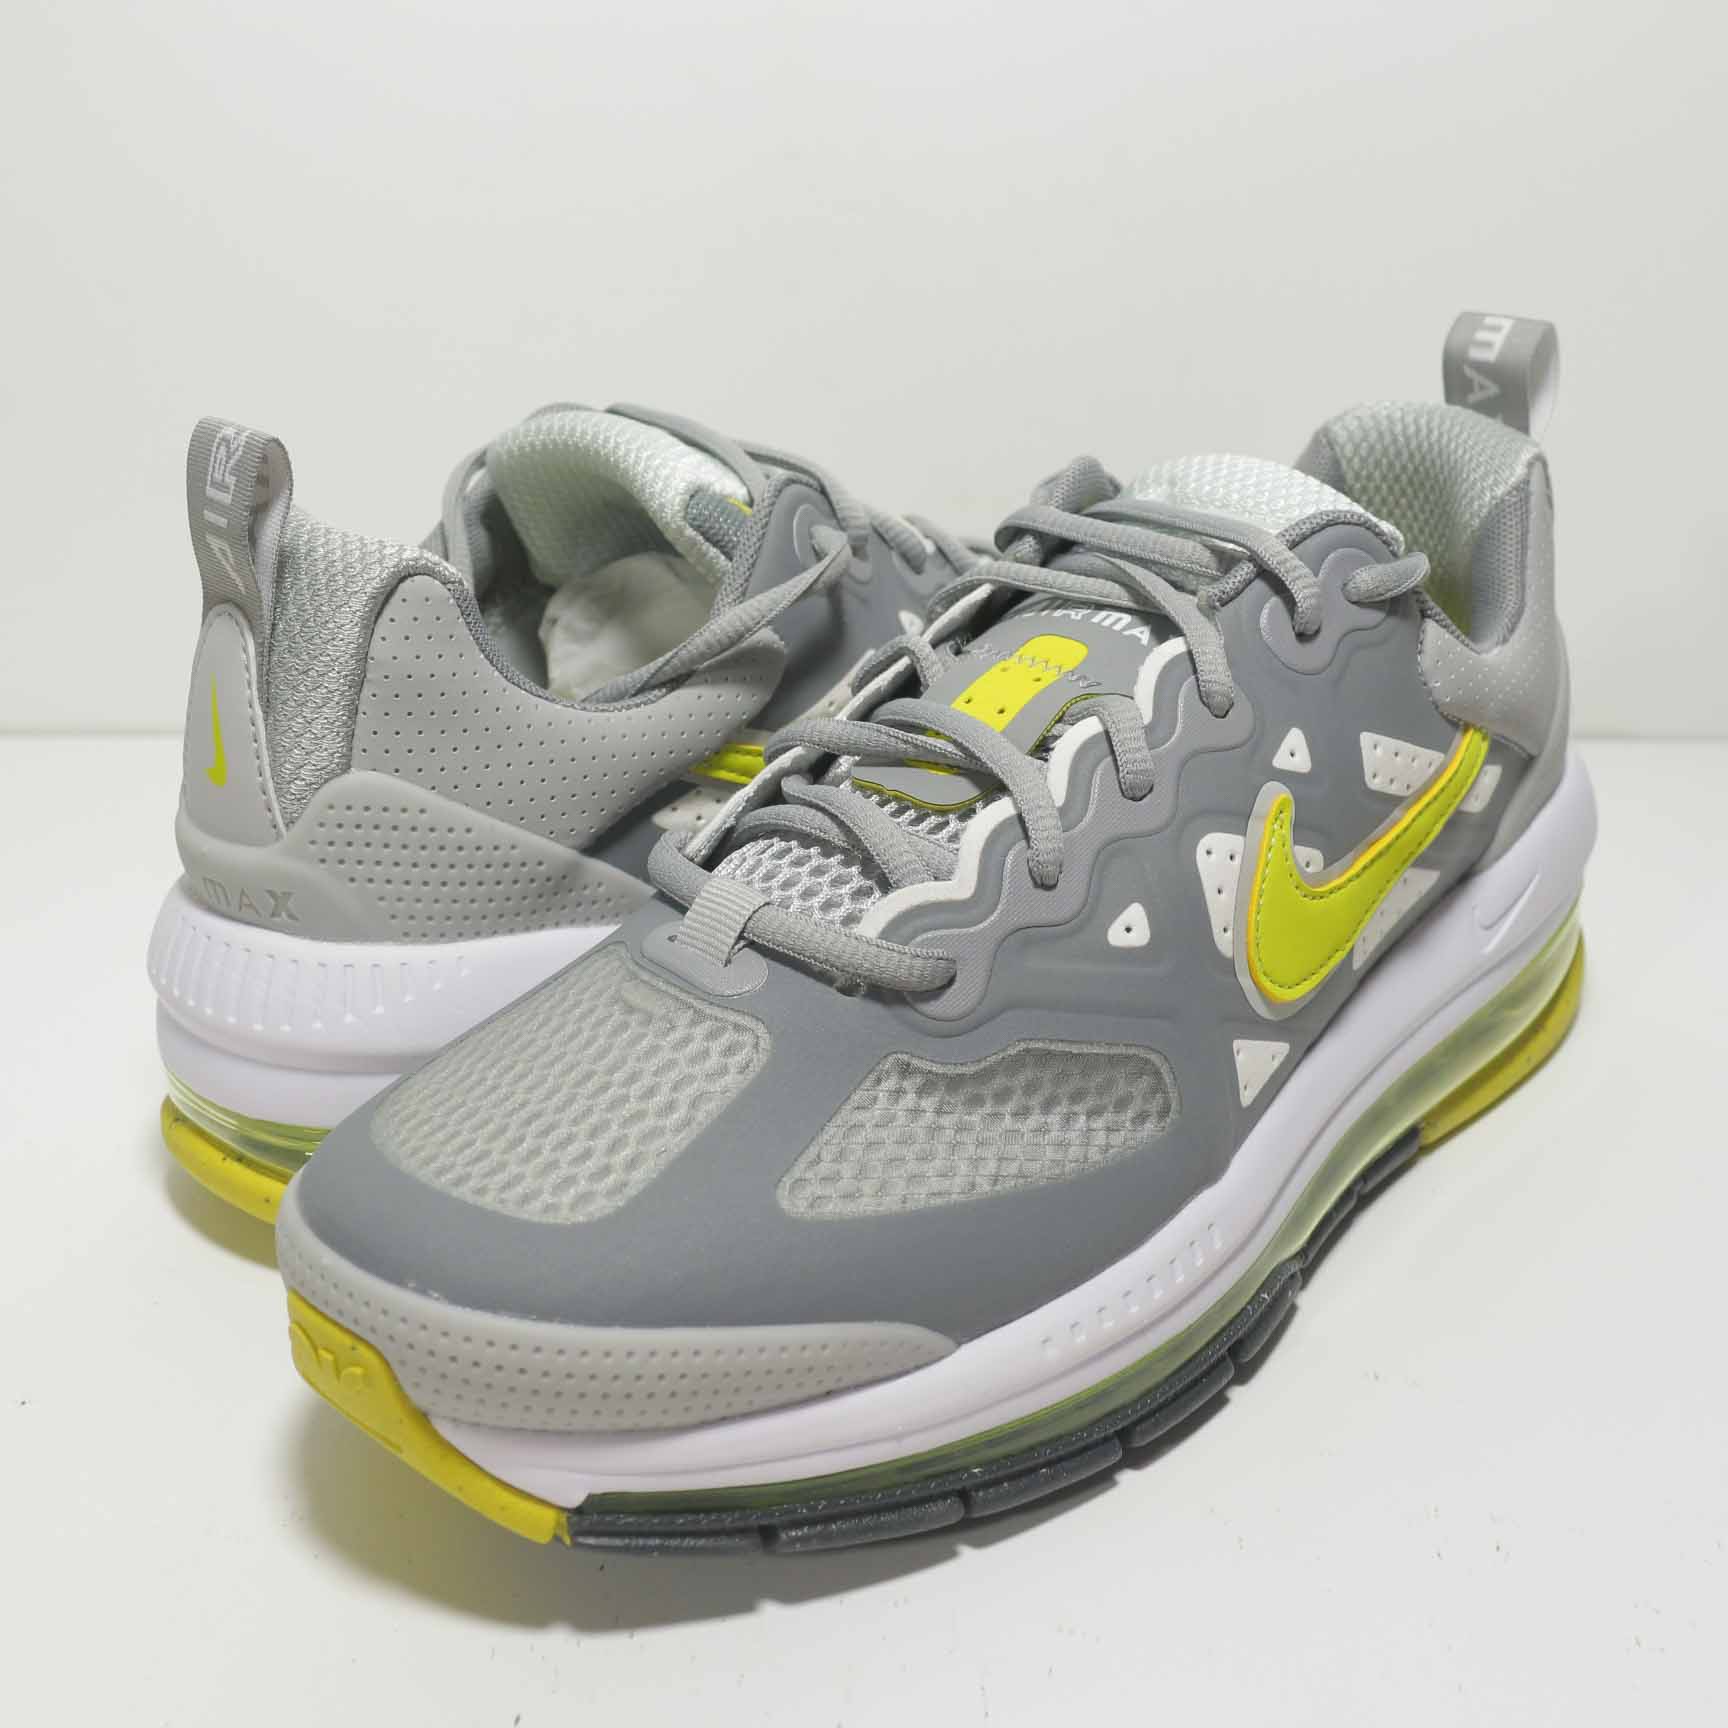 Nike Air Max Genome Grey Yellow White Shoes